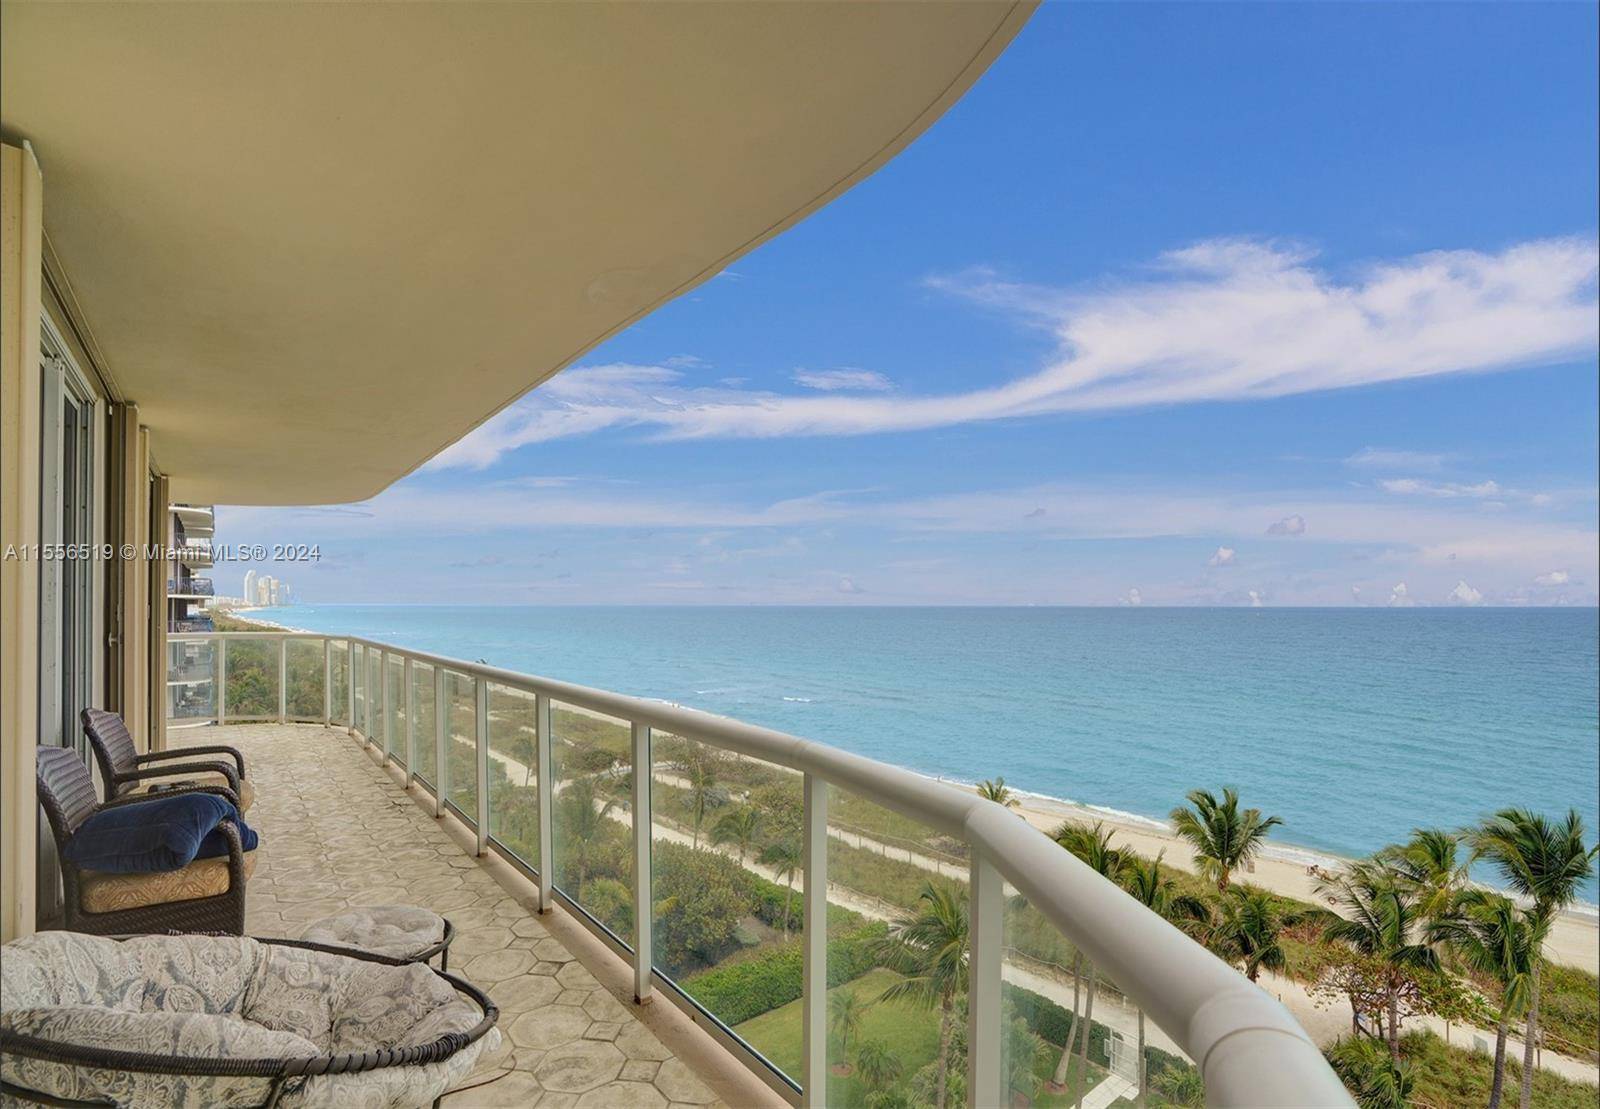 FRONT BEACH Spacious and comfortable 3 bedroom apartment in the Town of Surfside, at the Luxurious Ocean 88 Condominium.